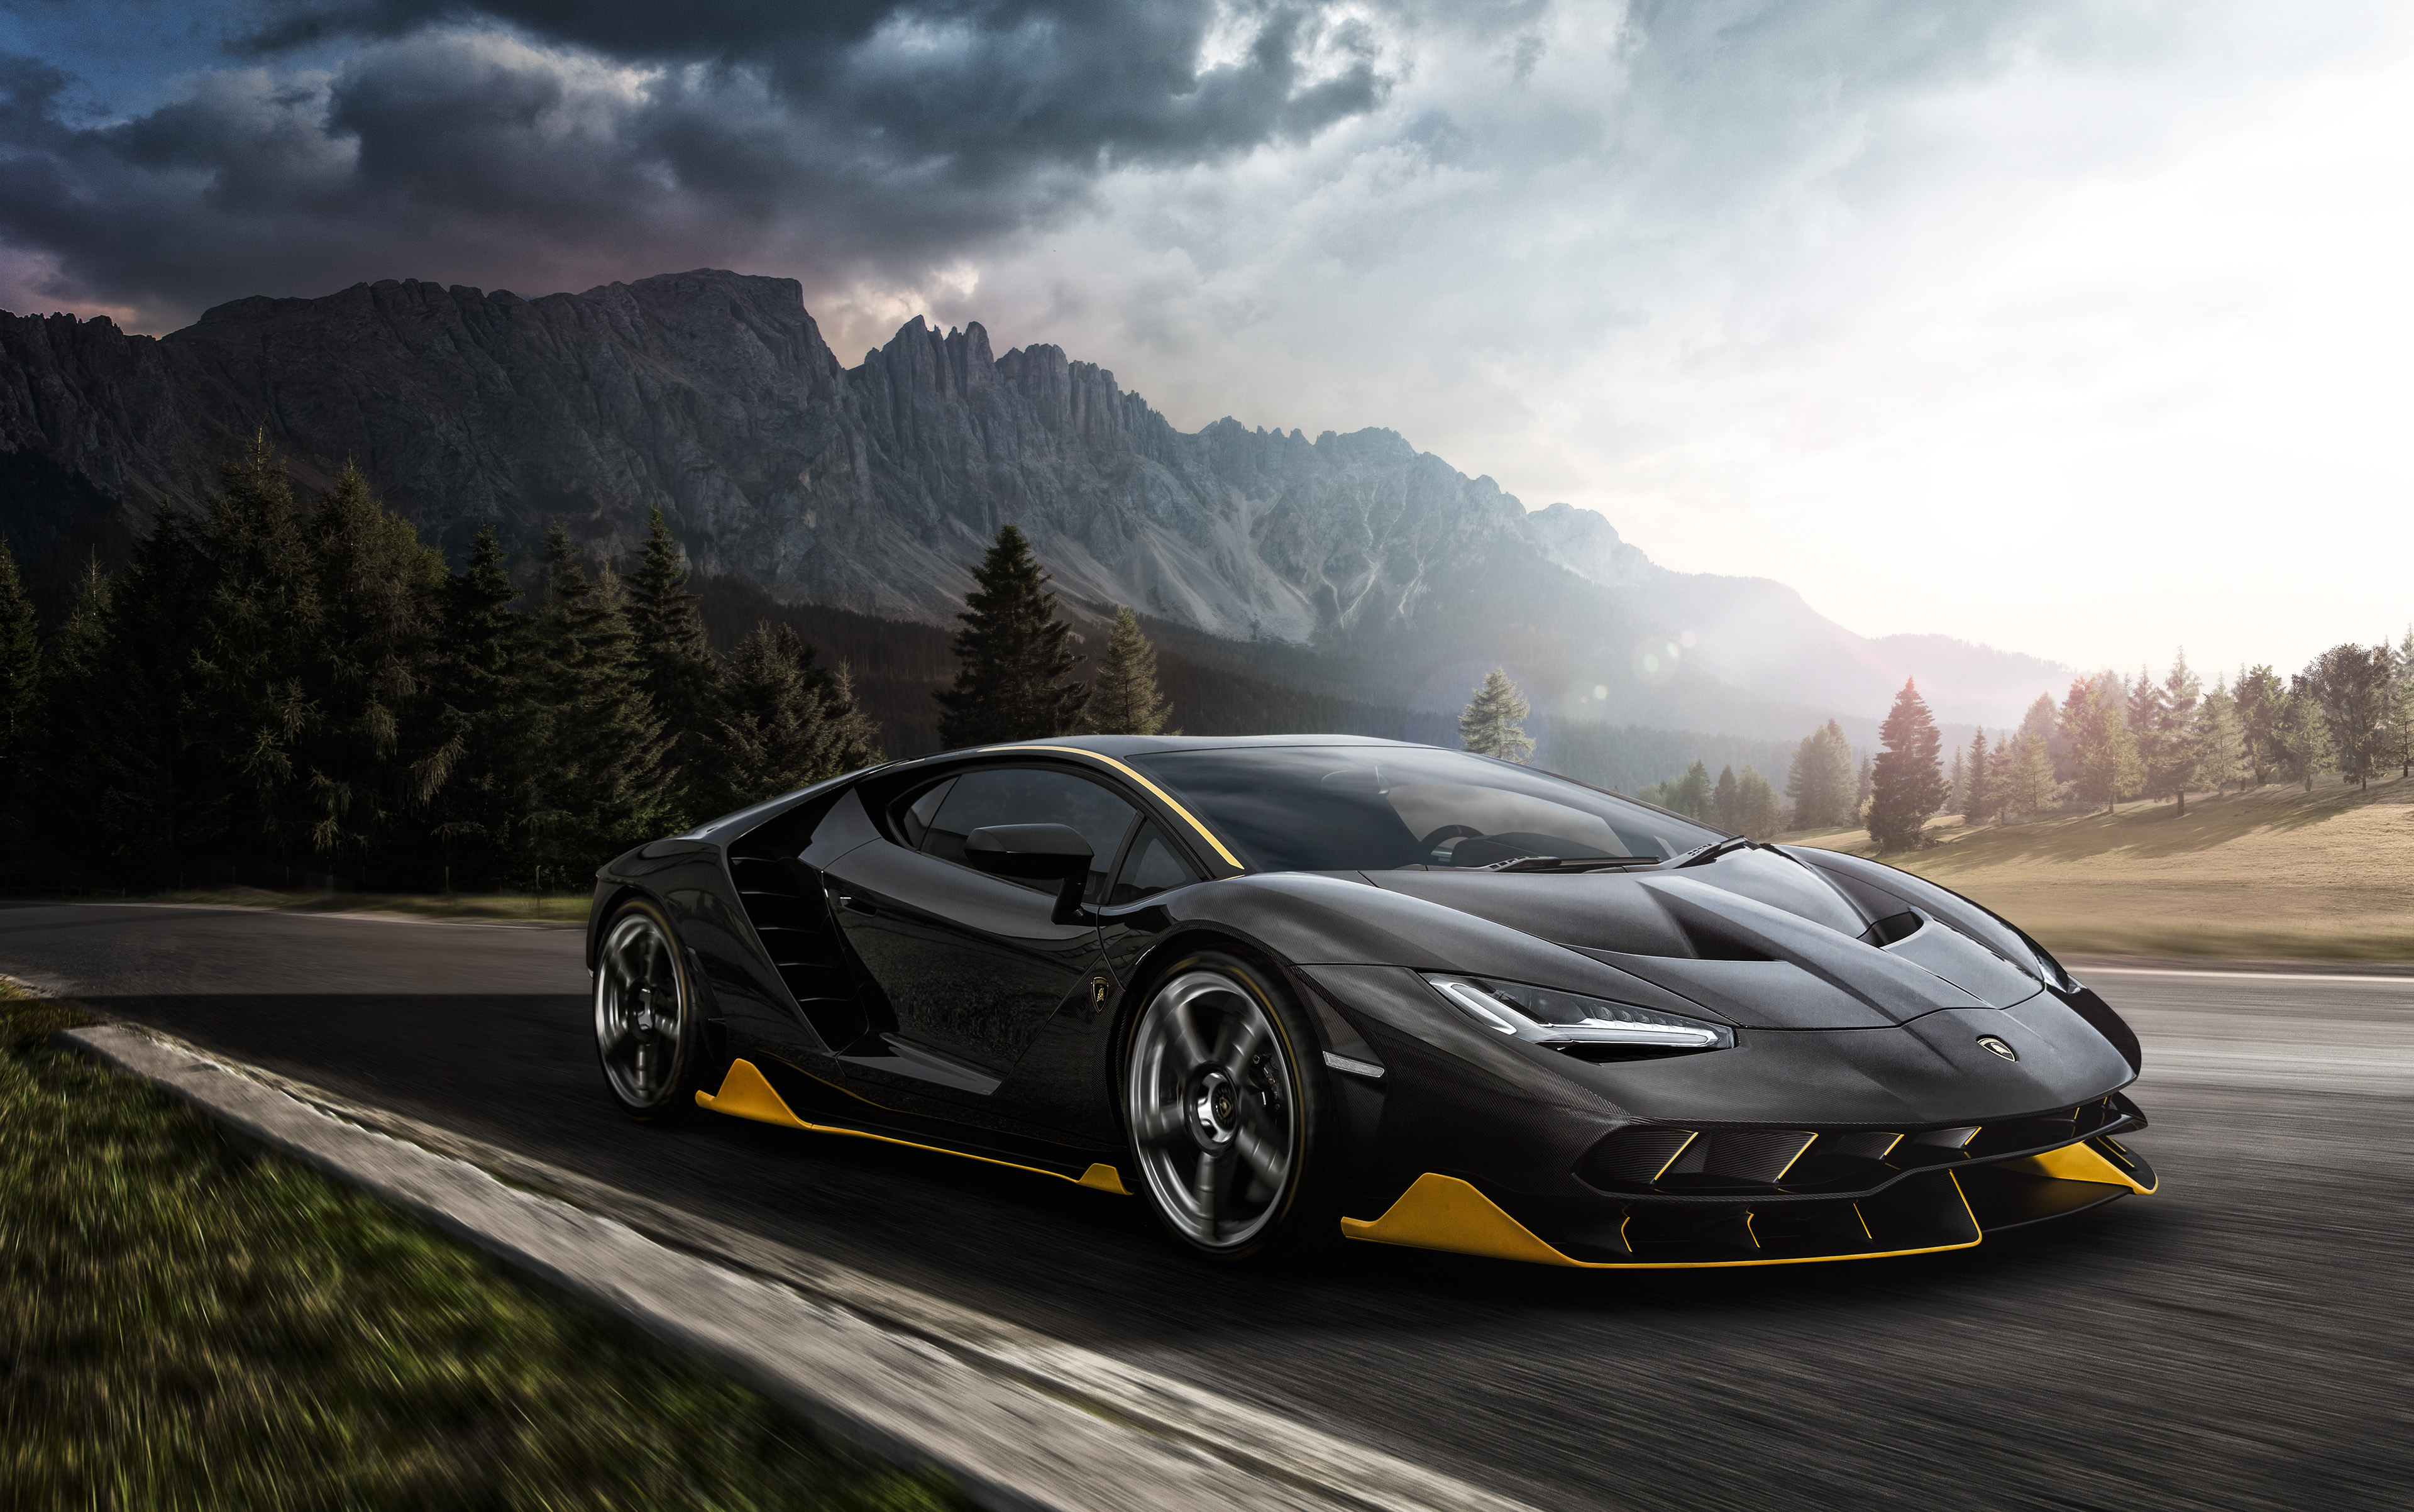 Black Lamborghini Aventador 4k 2018, HD Cars, 4k Wallpapers, Images,  Backgrounds, Photos and Pictures